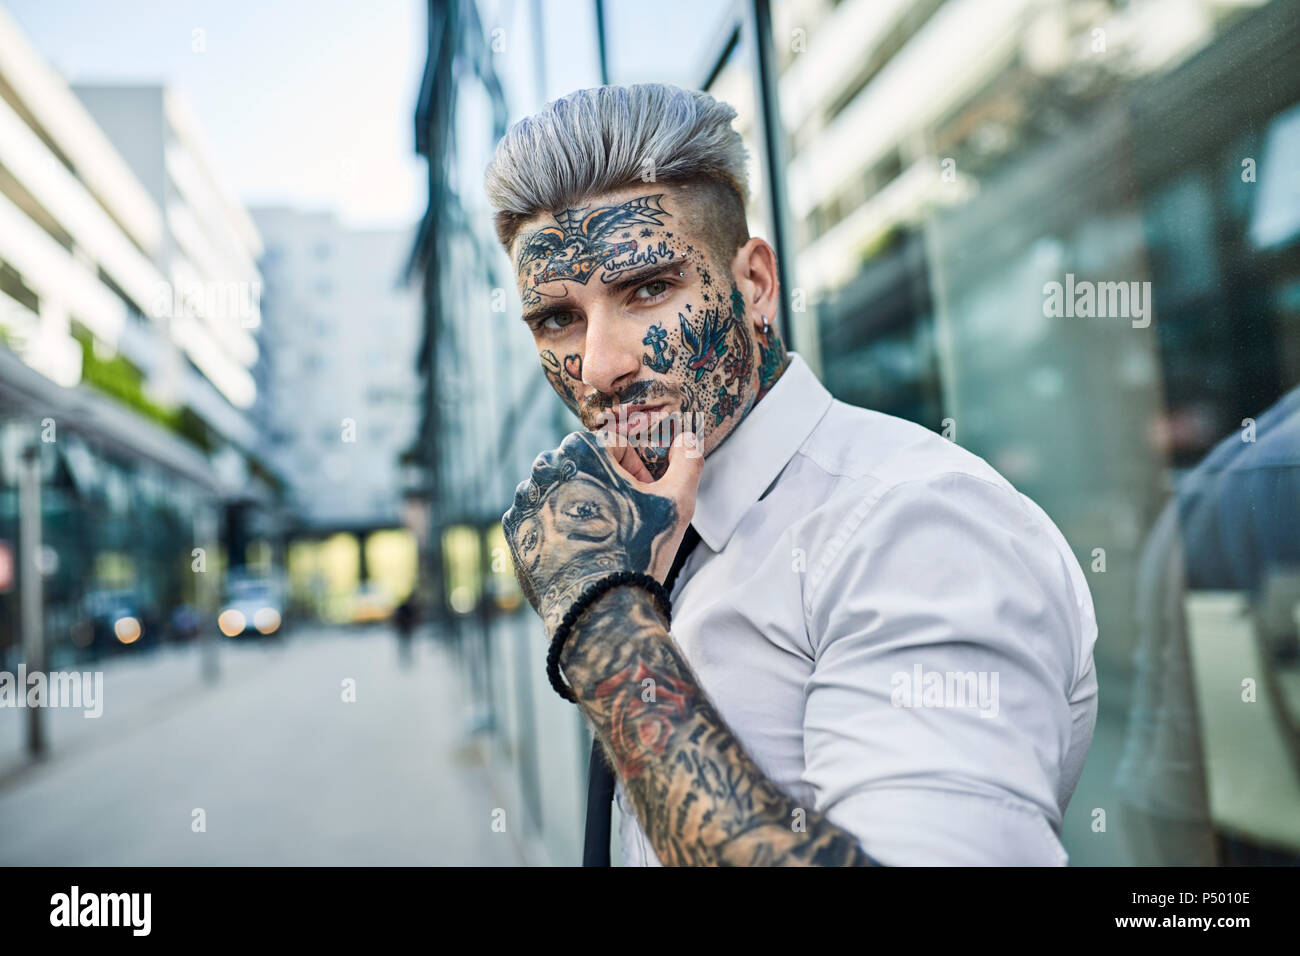 Businessman With Tattoos Images  Free Download on Freepik